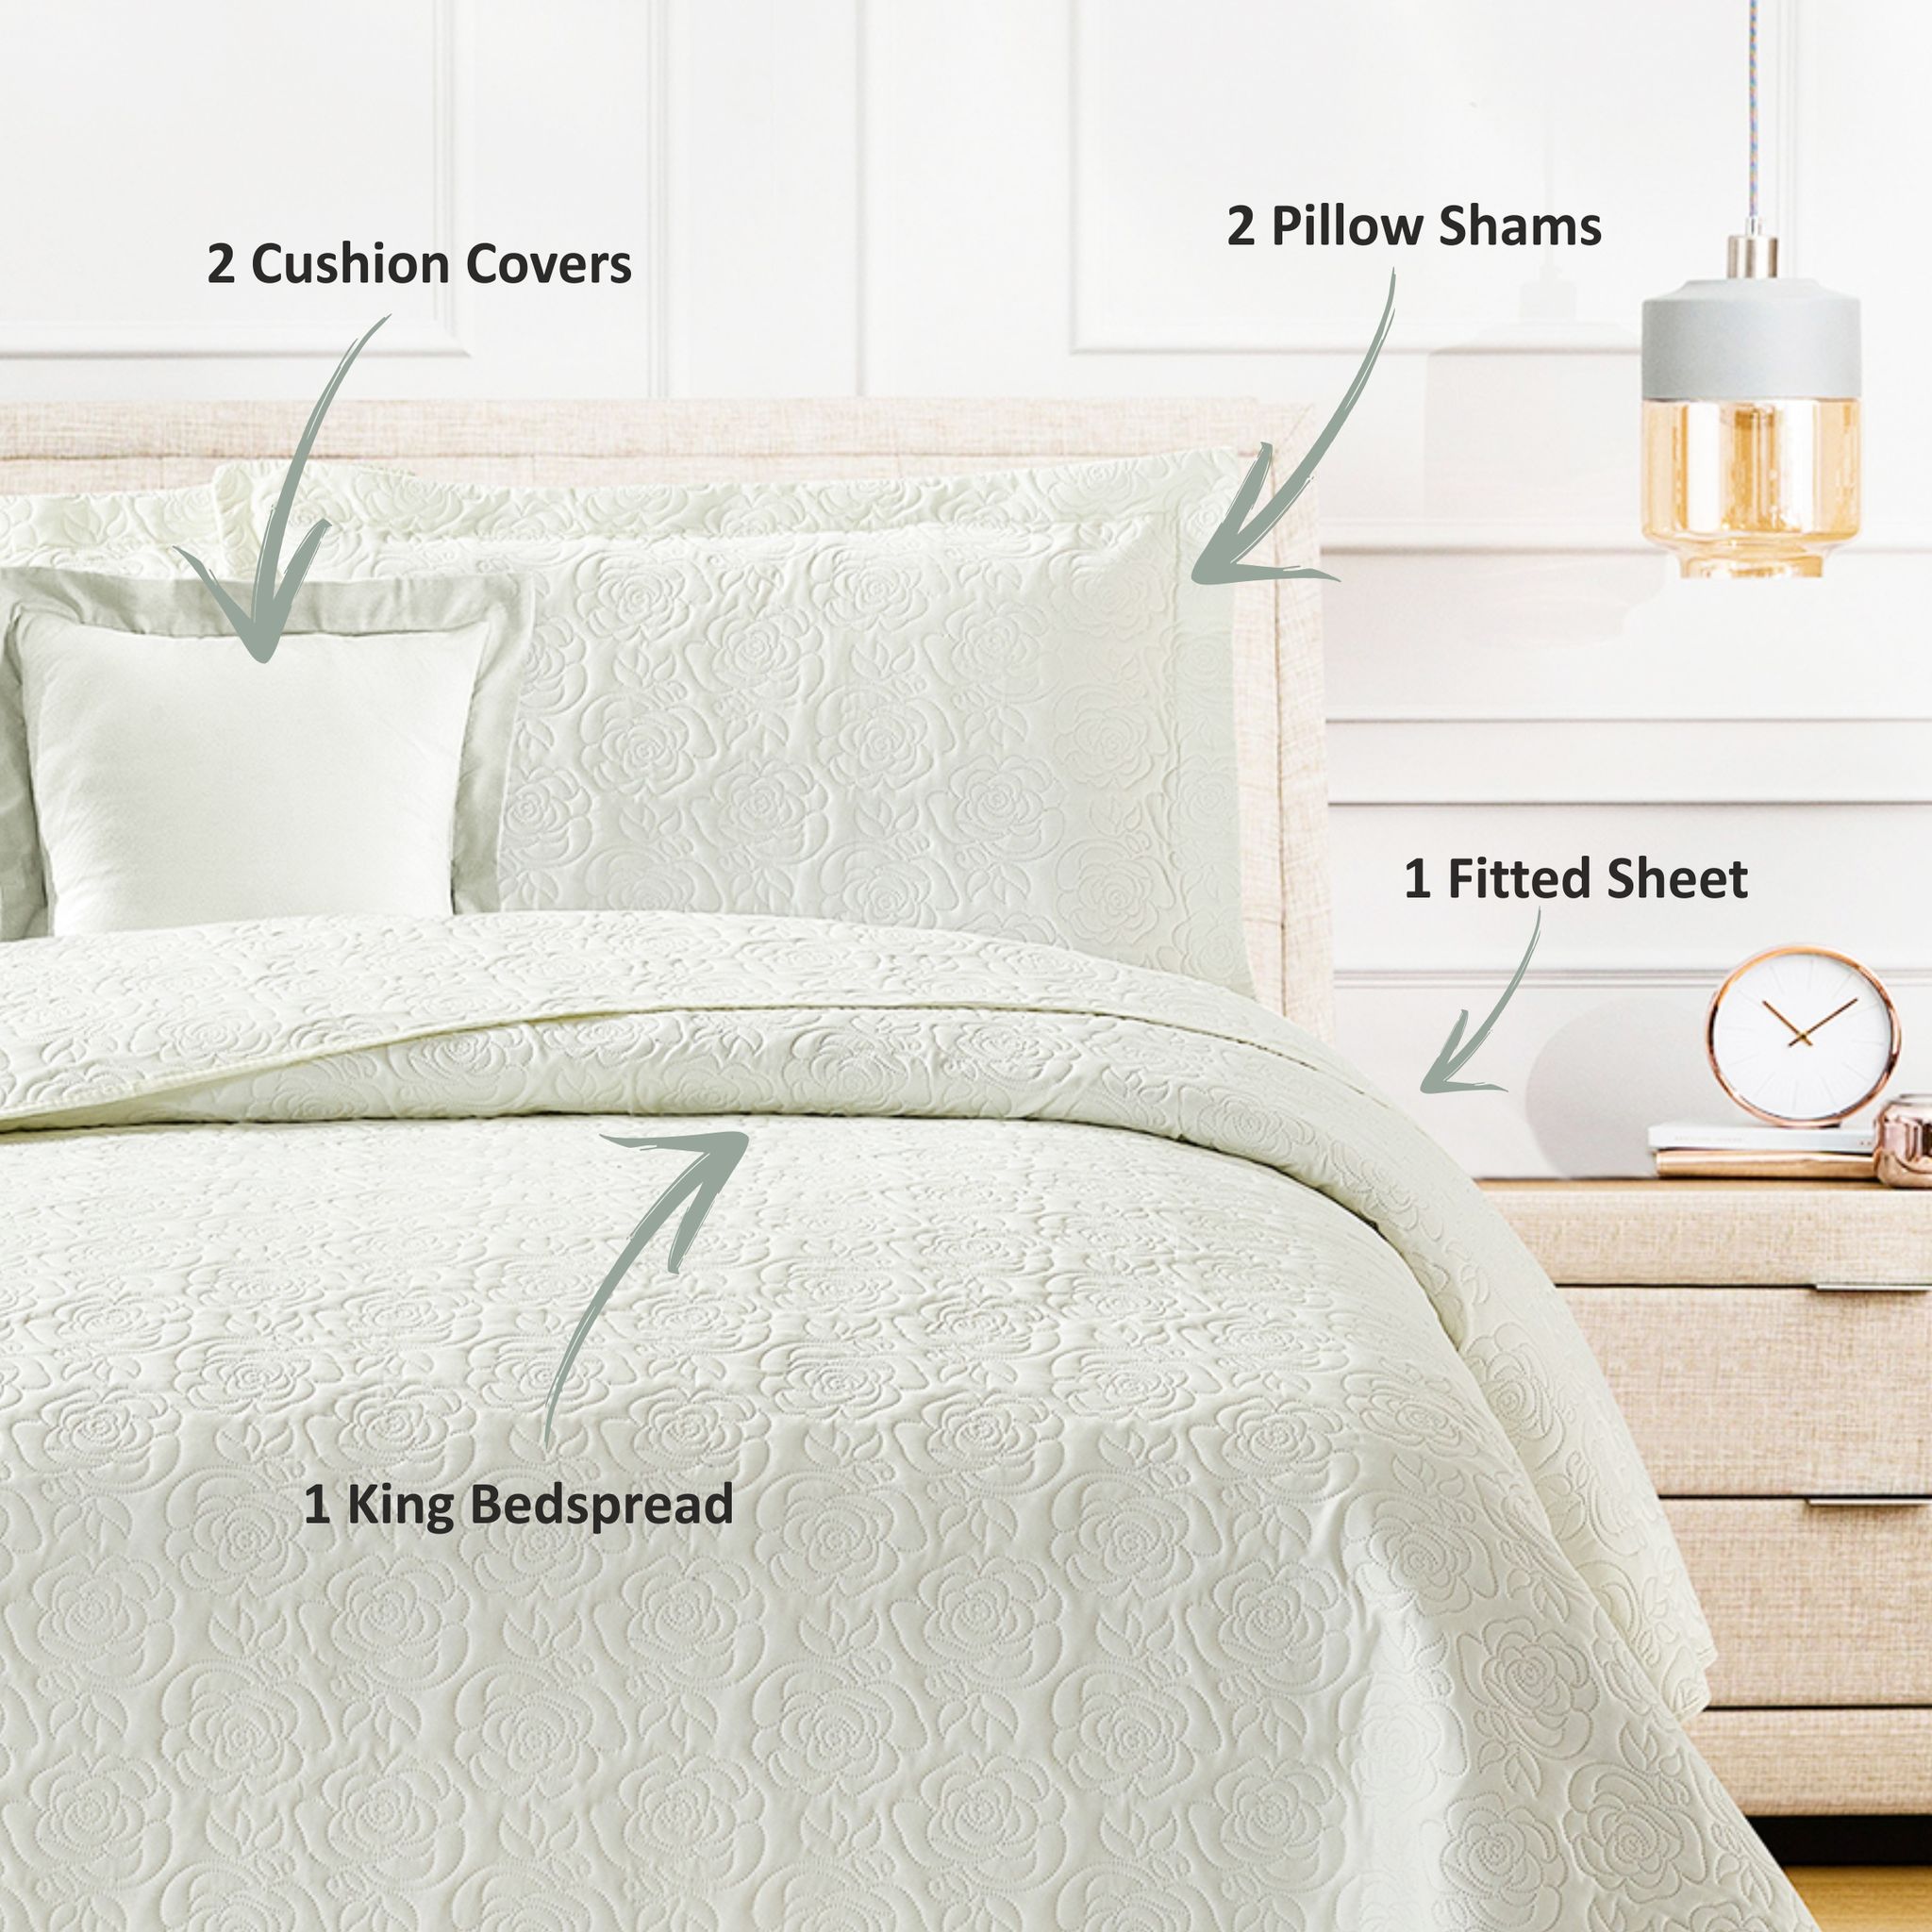 Ultrasonic Quilted Flower Comforter Set 6-Piece King Ivory